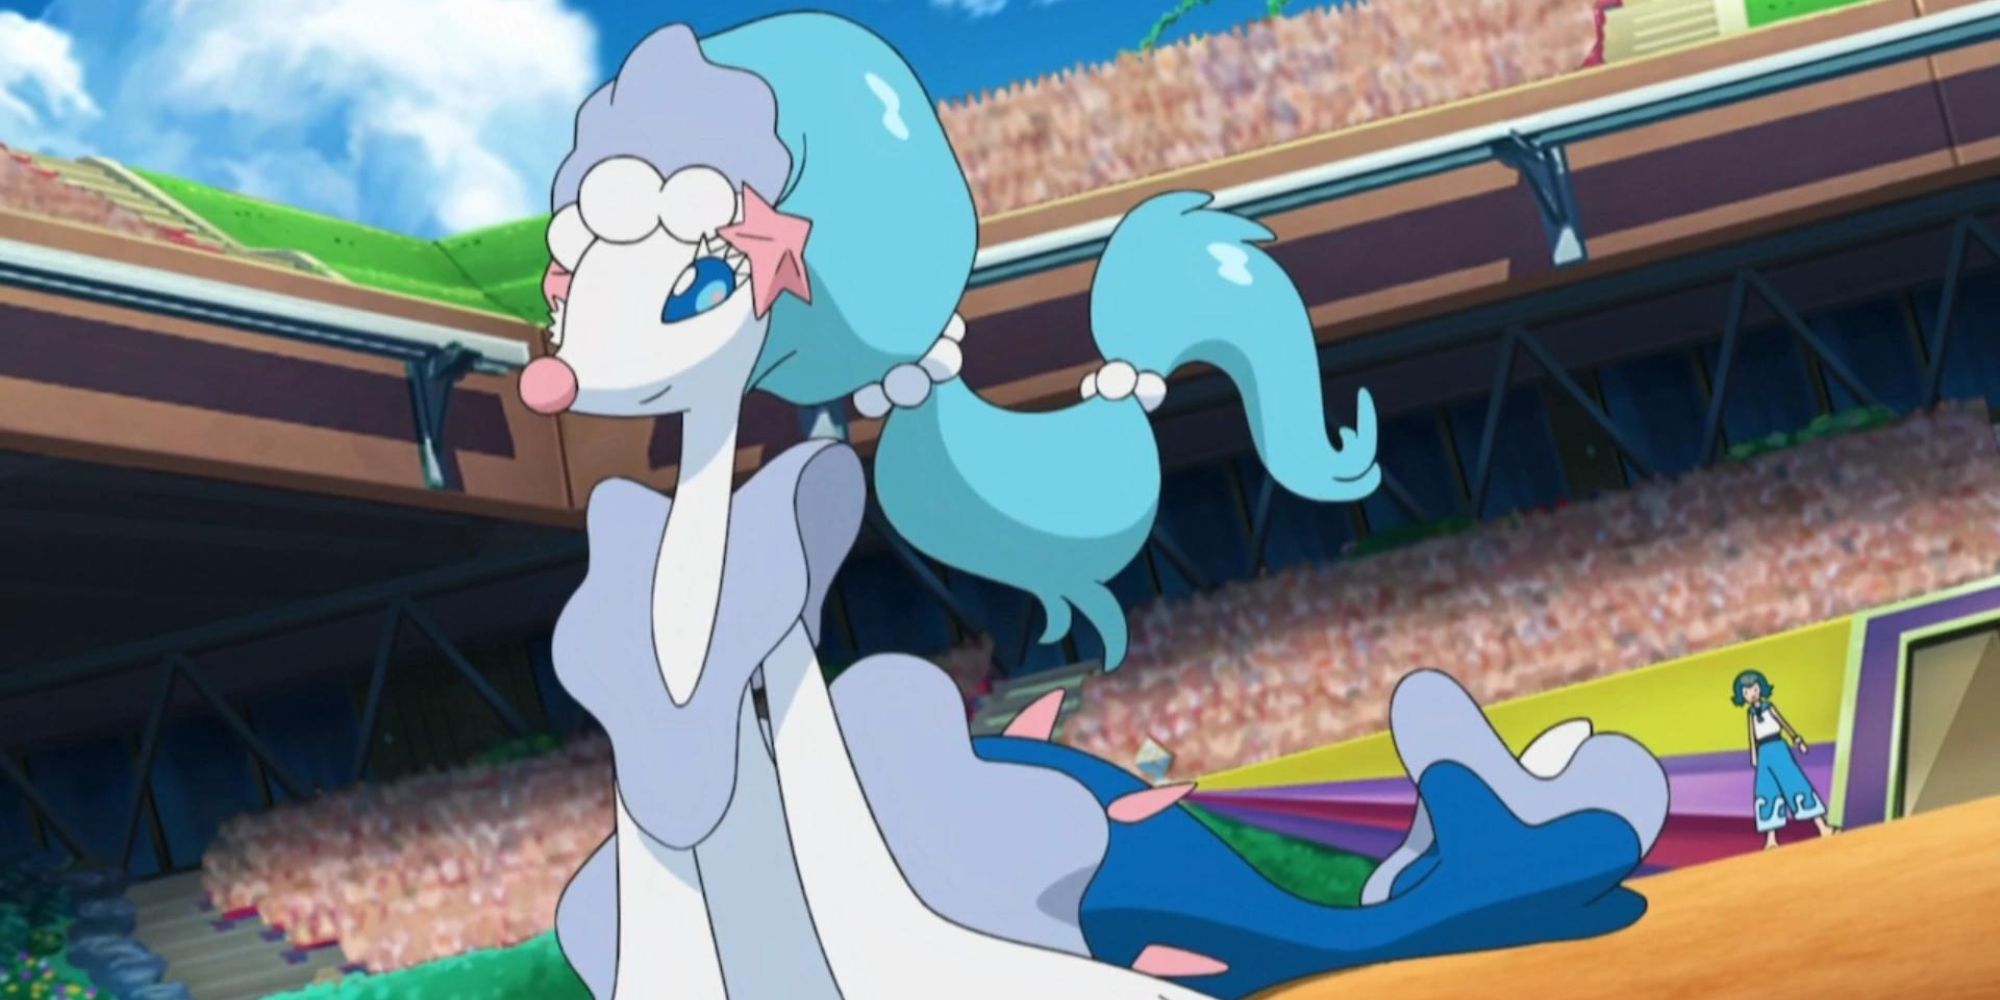 Primarina prepares for battle in a crowded stadium